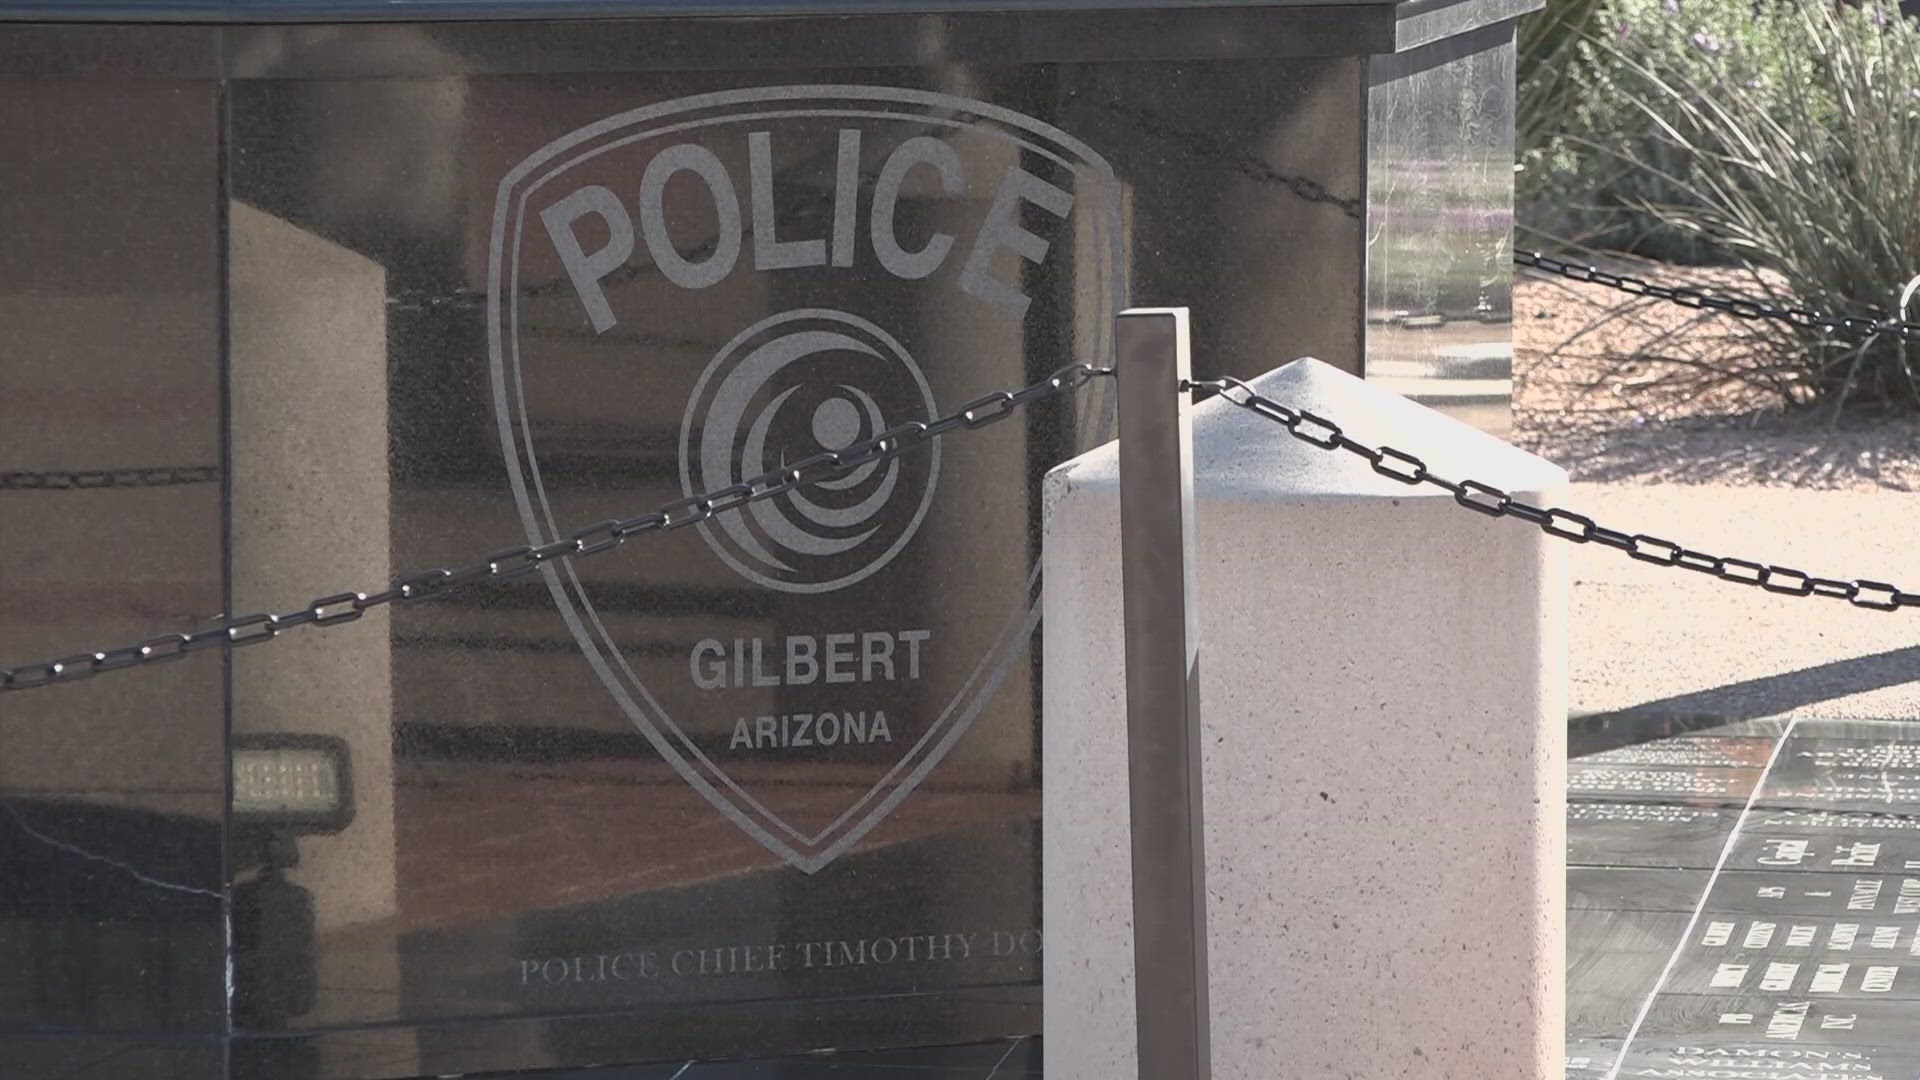 Gilbert police chief Michael Soelberg sat down with 12News to discuss the latest in teen violence arrests and the Preston Lord murder investigation.